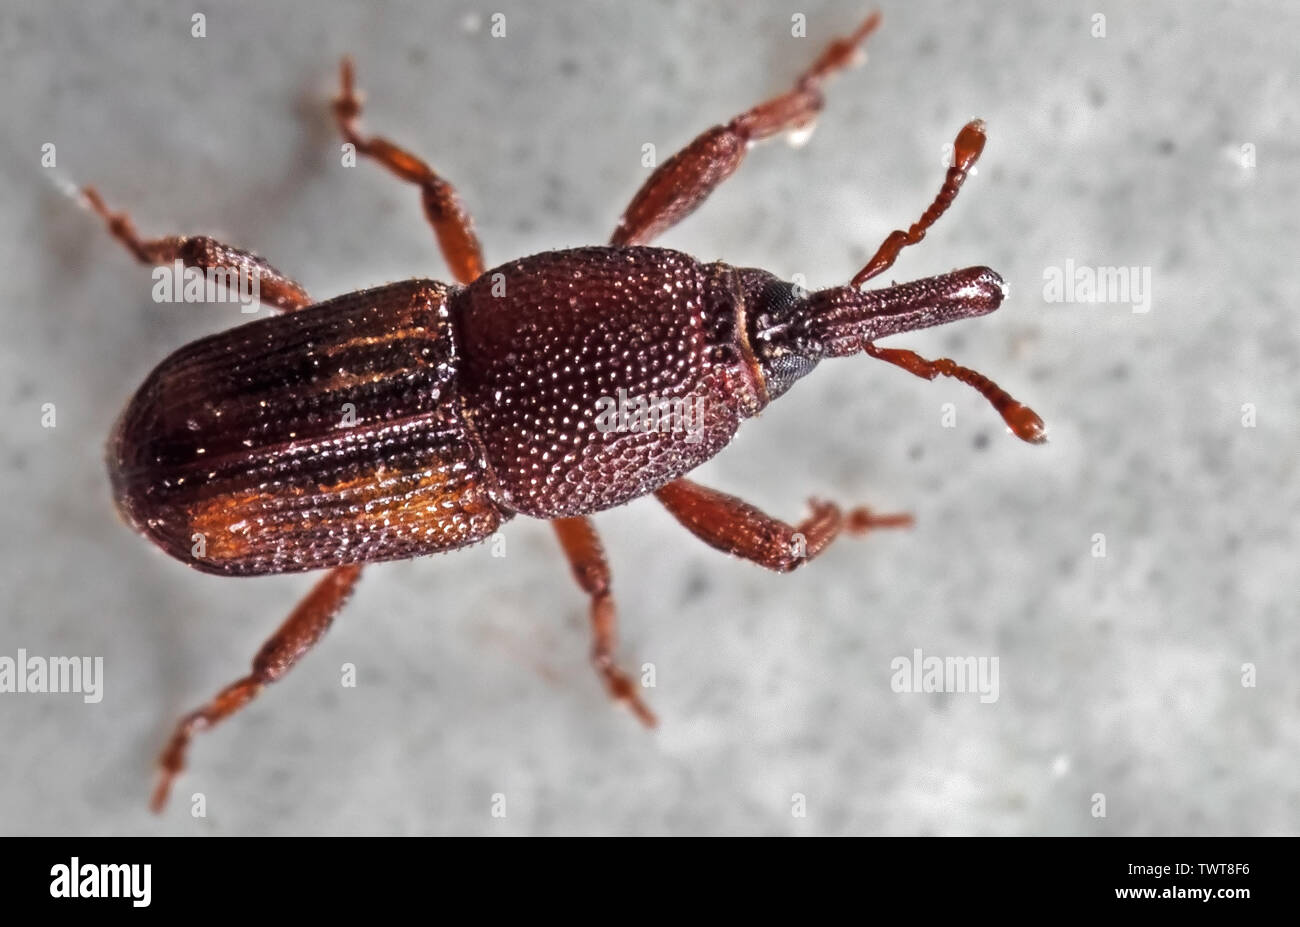 Macro Photography of Rice Weevil or Sitophilus oryzae on The Floor Stock Photo